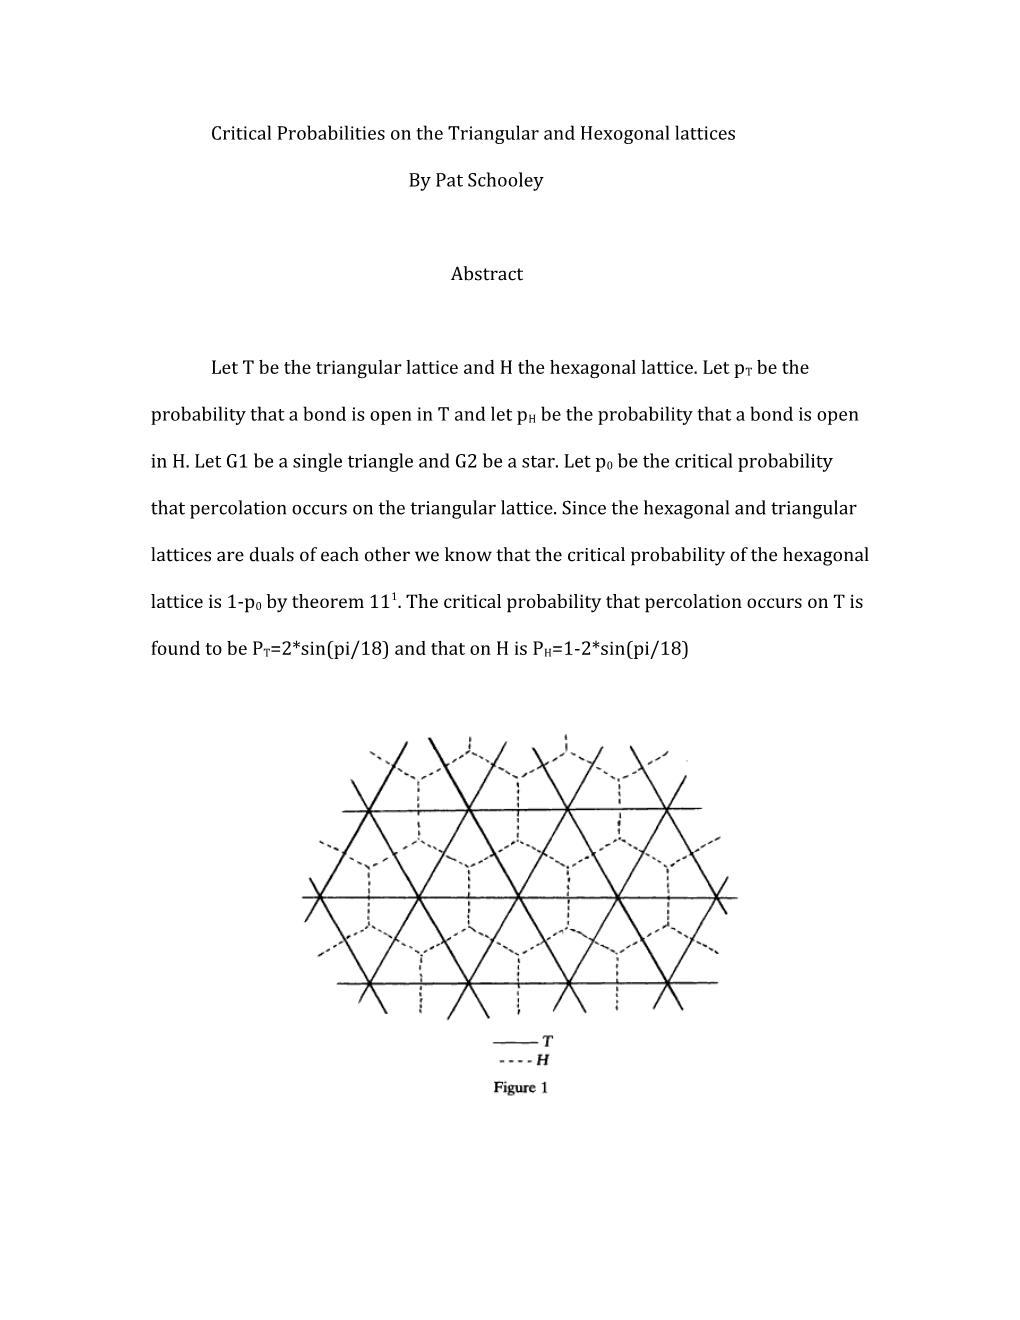 Critical Probabilities on the Triangular and Hexogonal Lattices